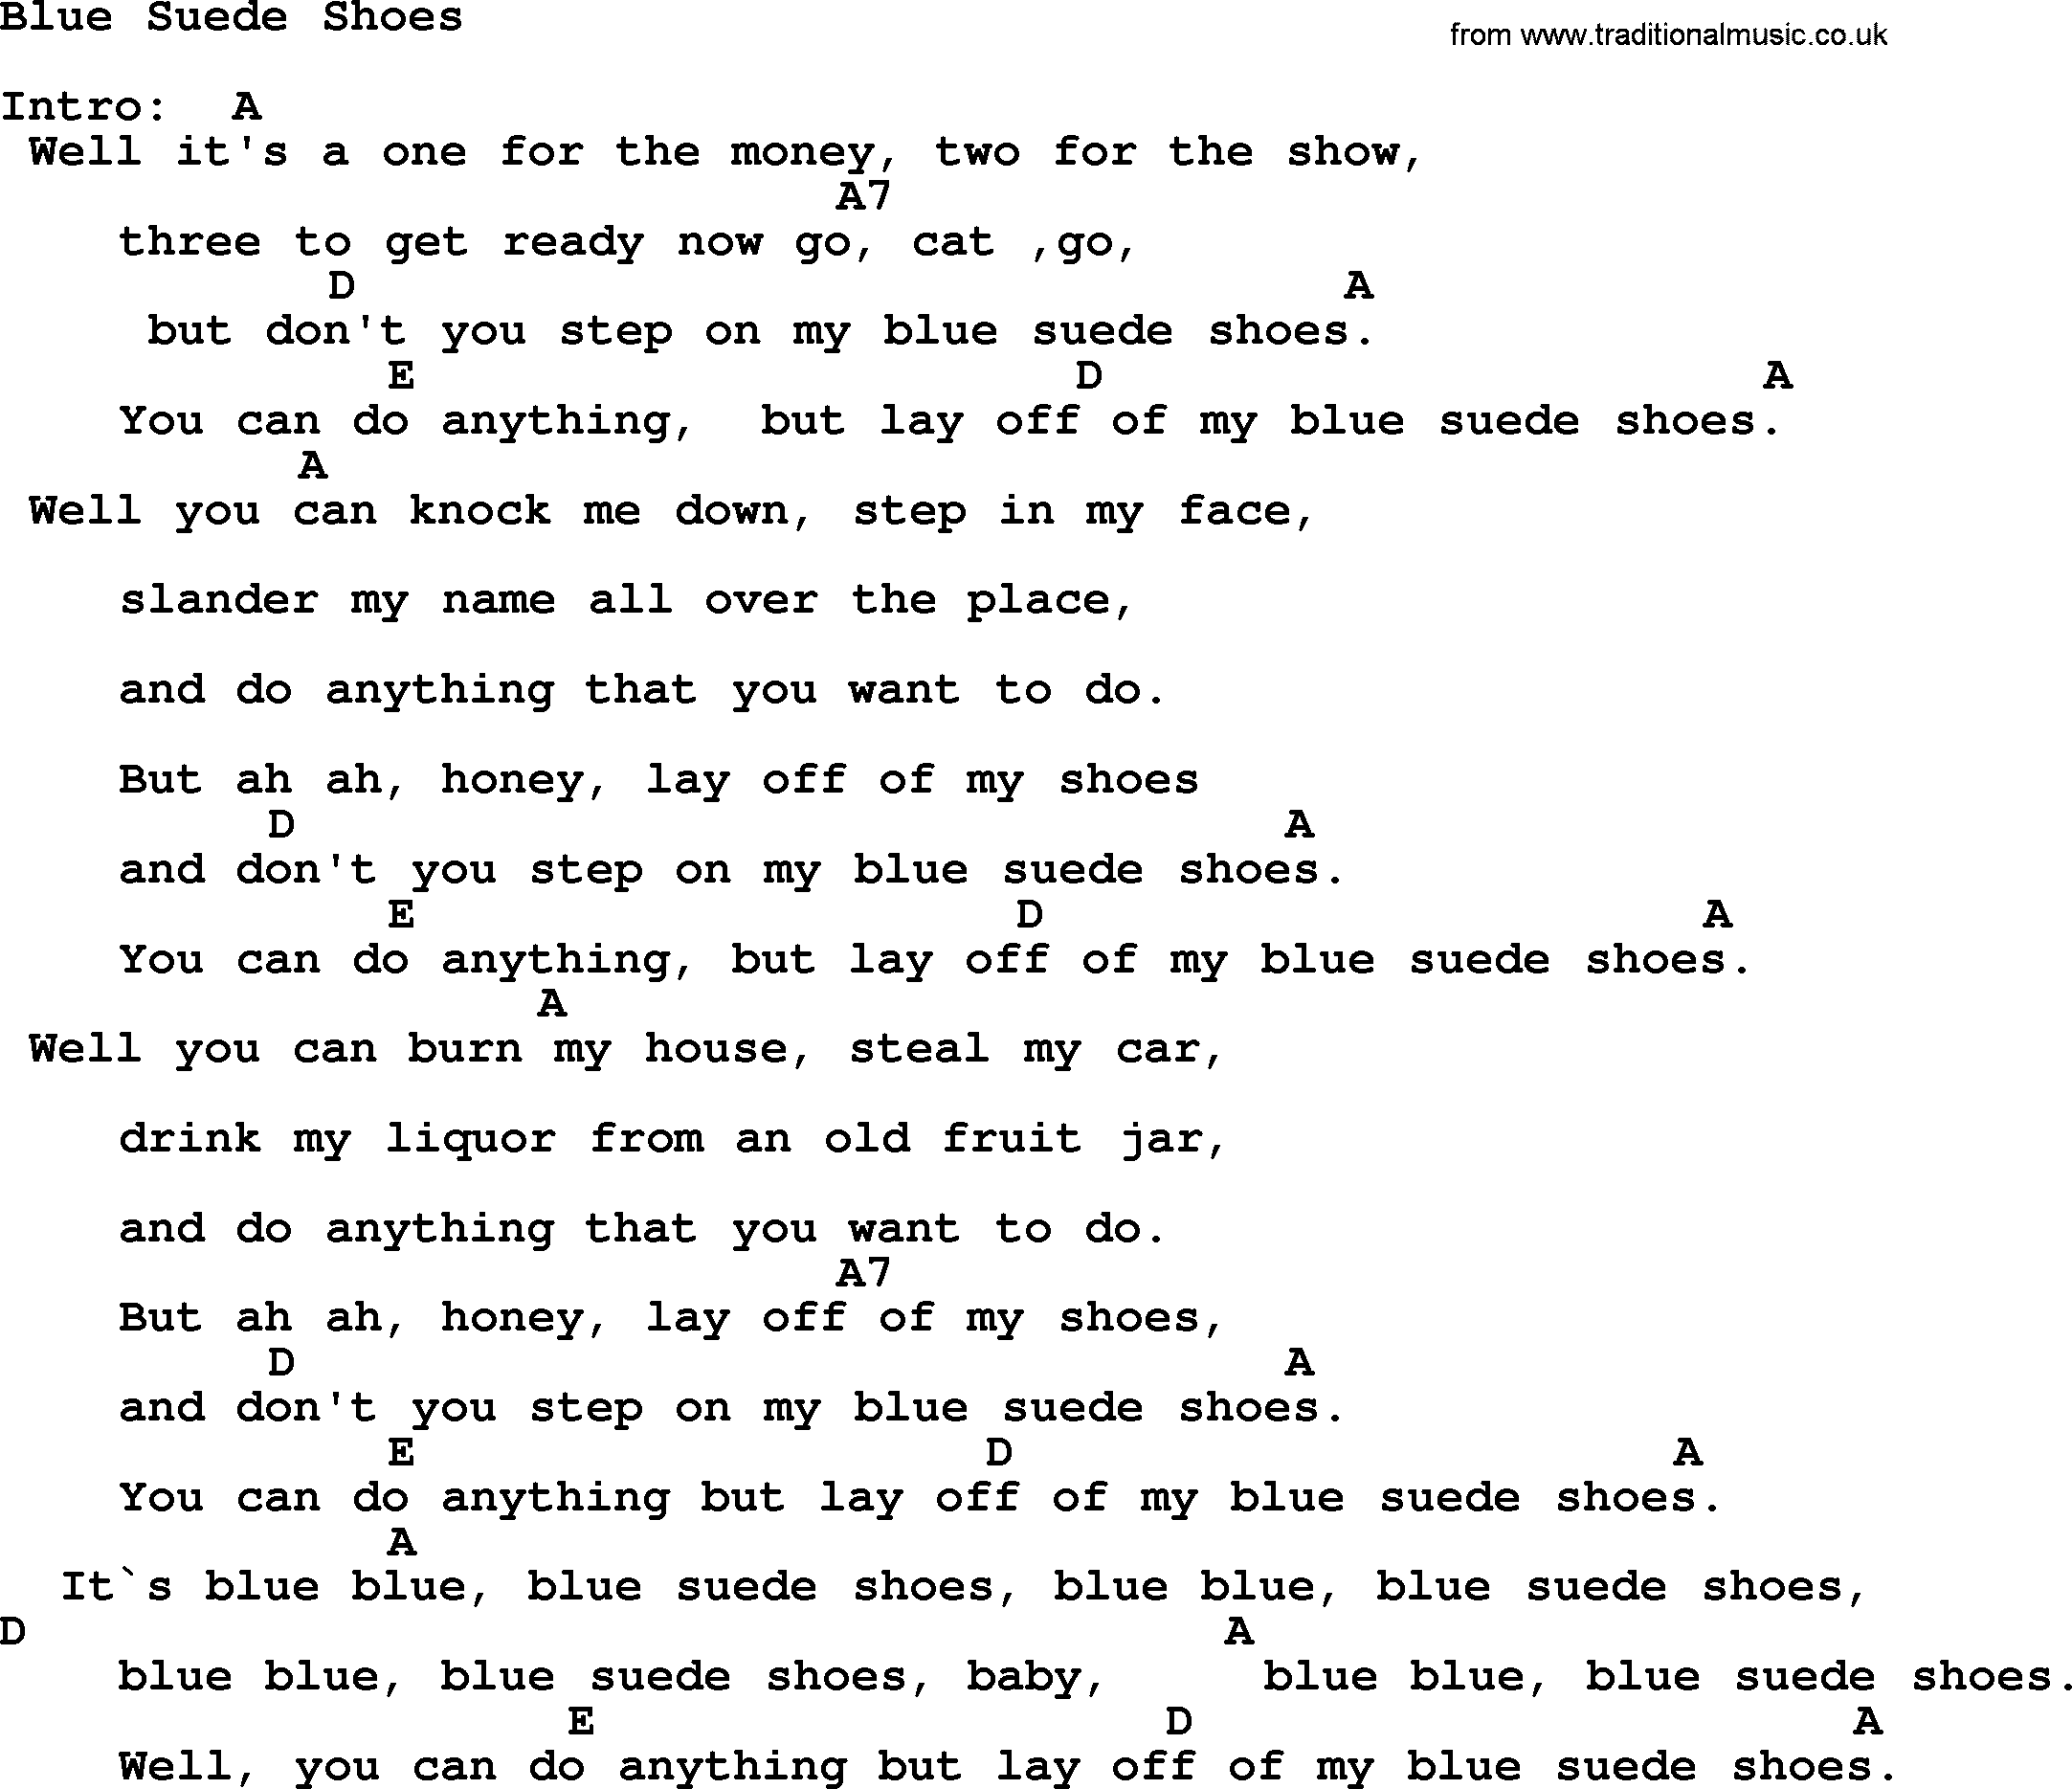 Johnny Cash song Blue Suede Shoes, lyrics and chords